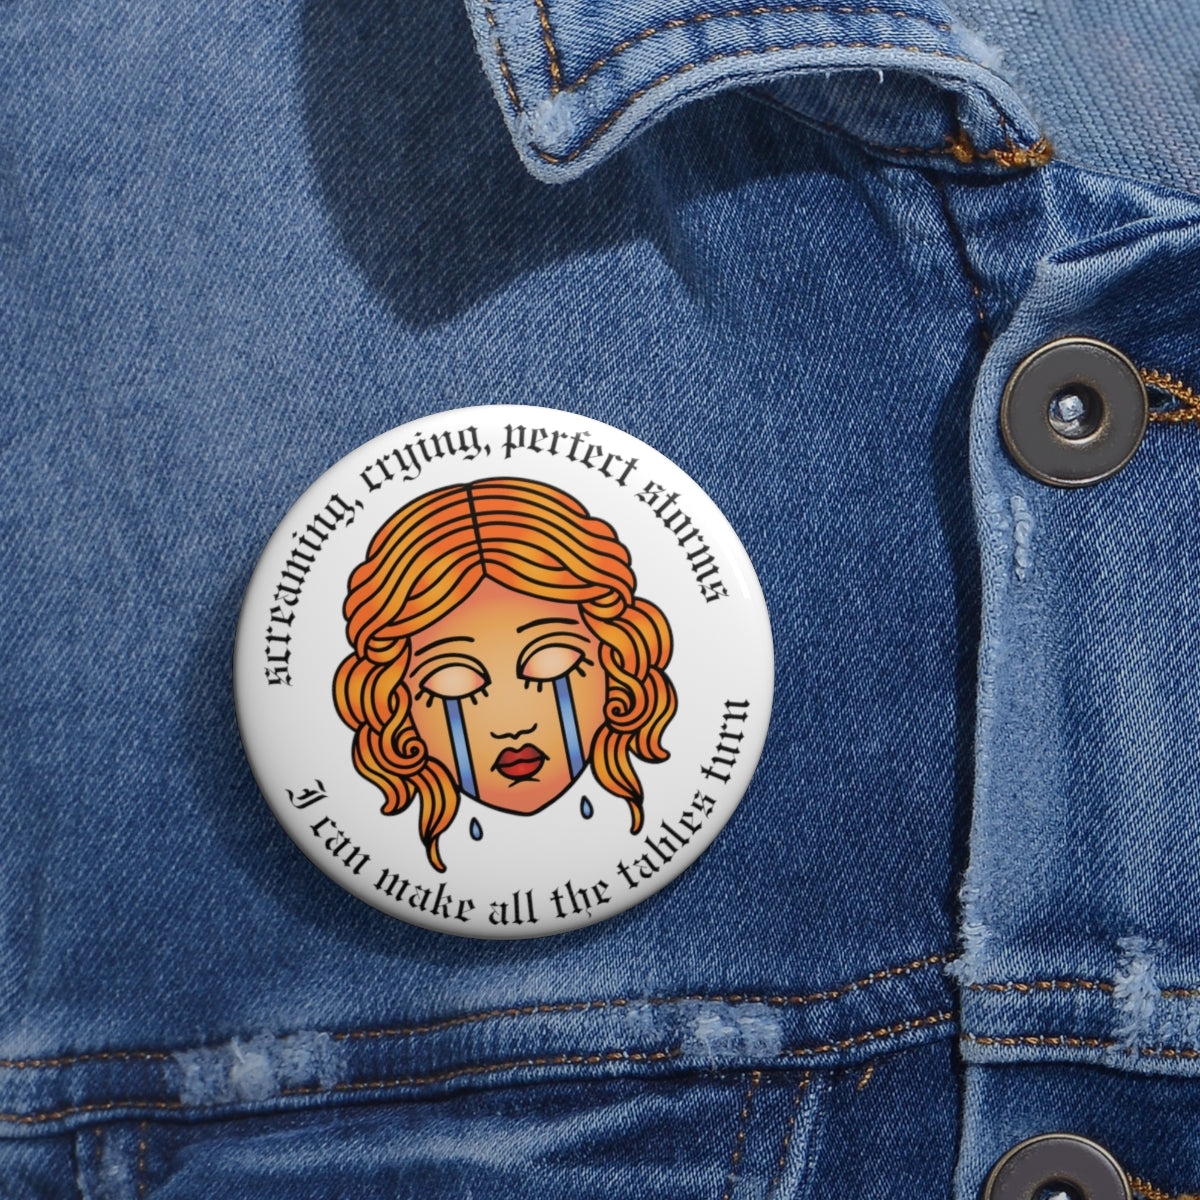 Blank Space 'screaming crying perfect storm' Pin Button - 1989 - SpookySwiftie